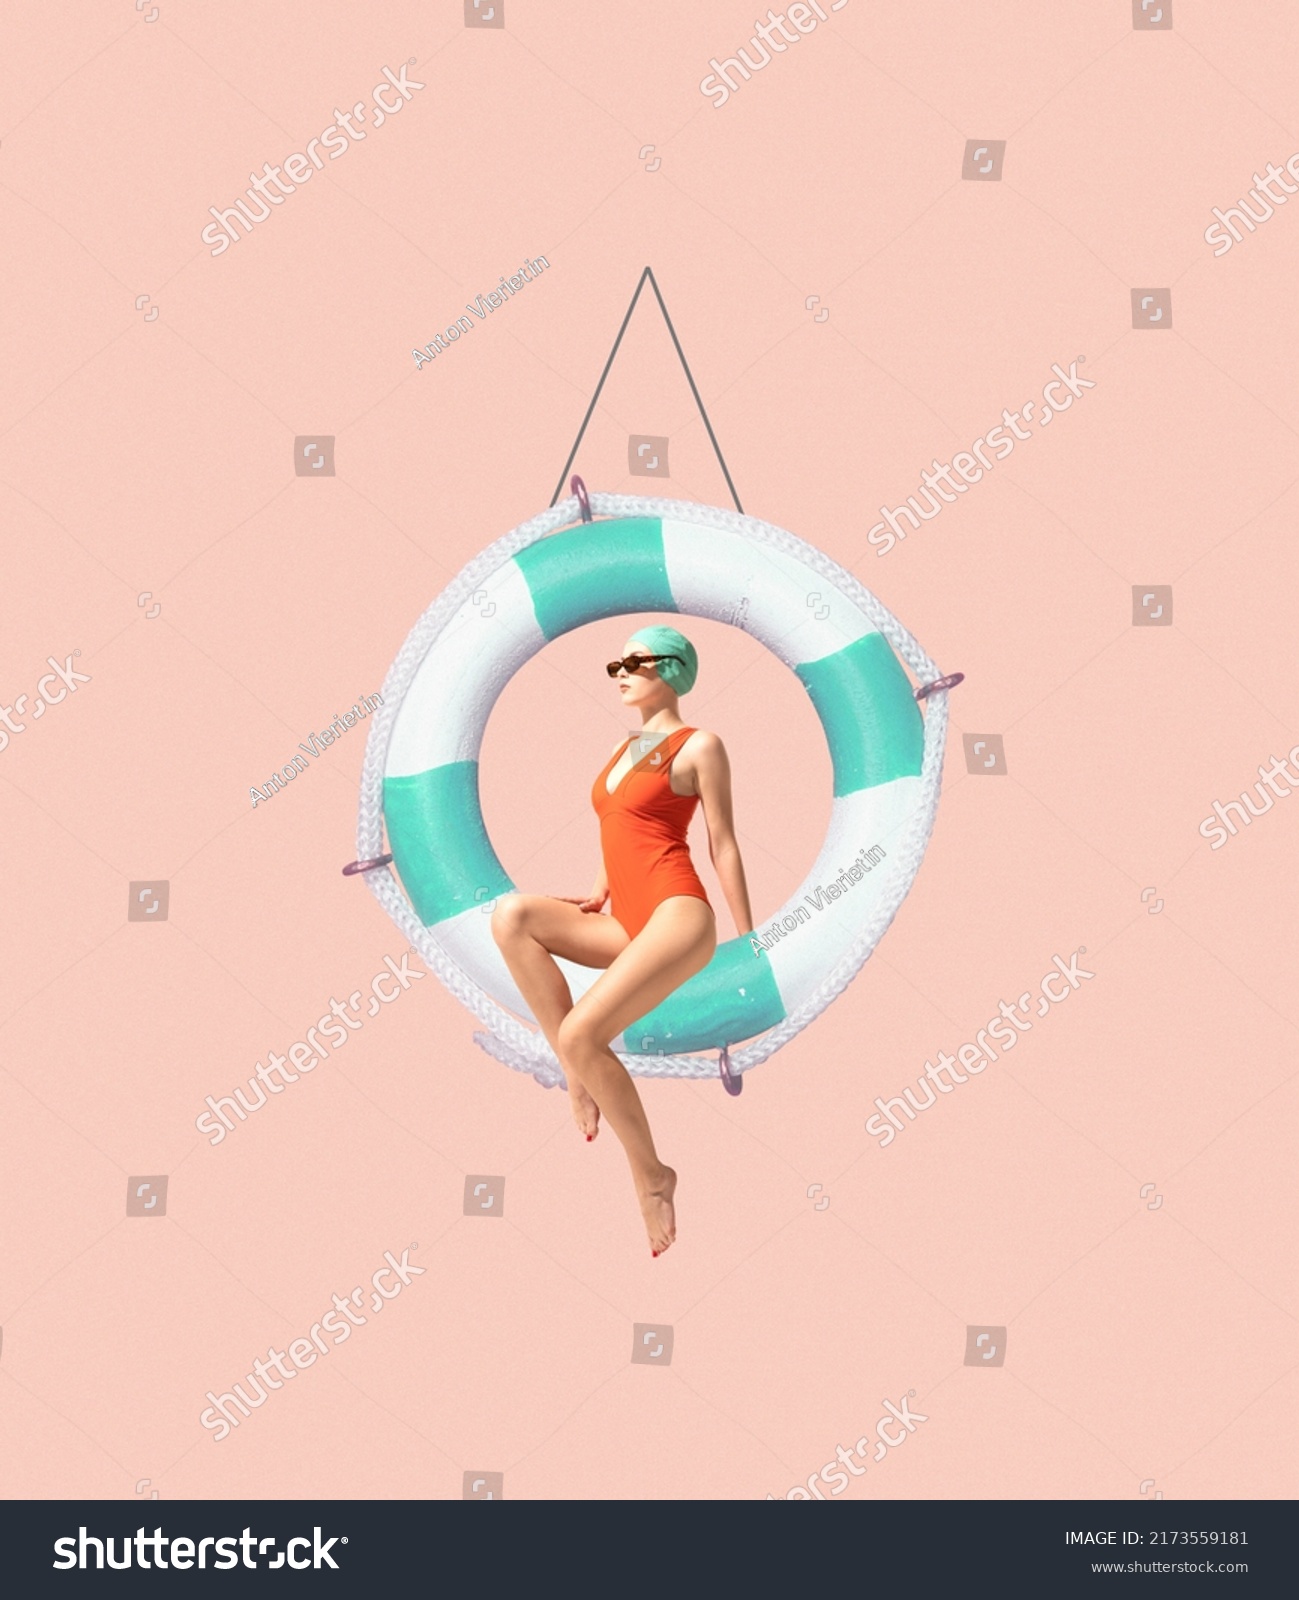 Contemporary art collage. Stylish young girl in swimming suit and cap sitting on lifebuoy isolated over peach background. Concept of summer, mood, creativity, party, fun. Copy space for ad, poster #2173559181